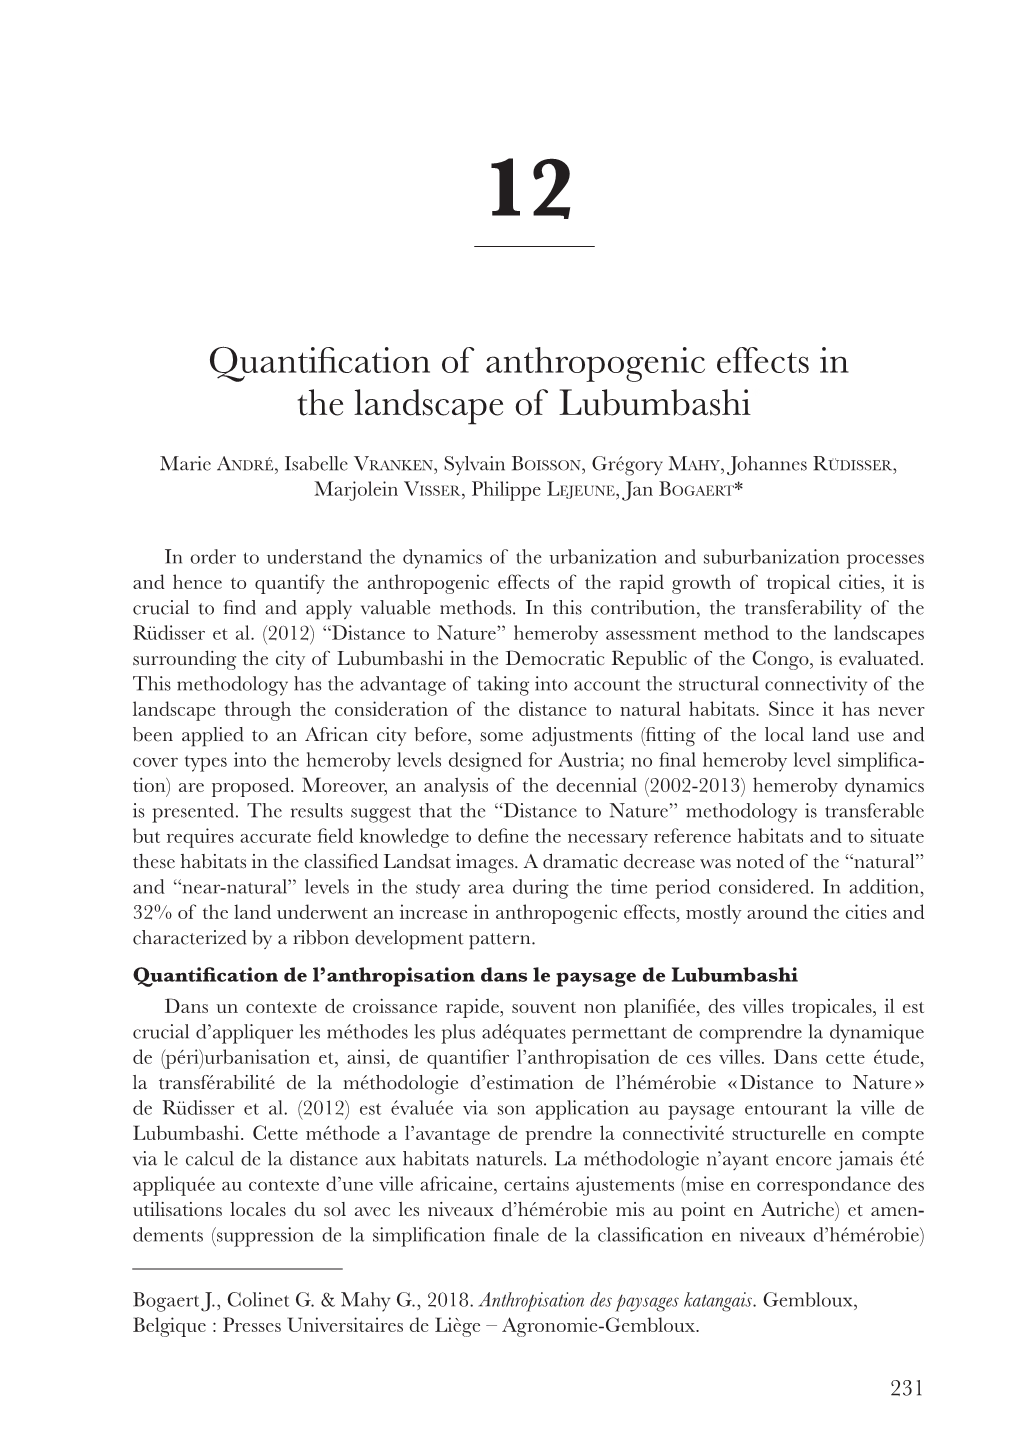 Quantification of Anthropogenic Effects in the Landscape of Lubumbashi*